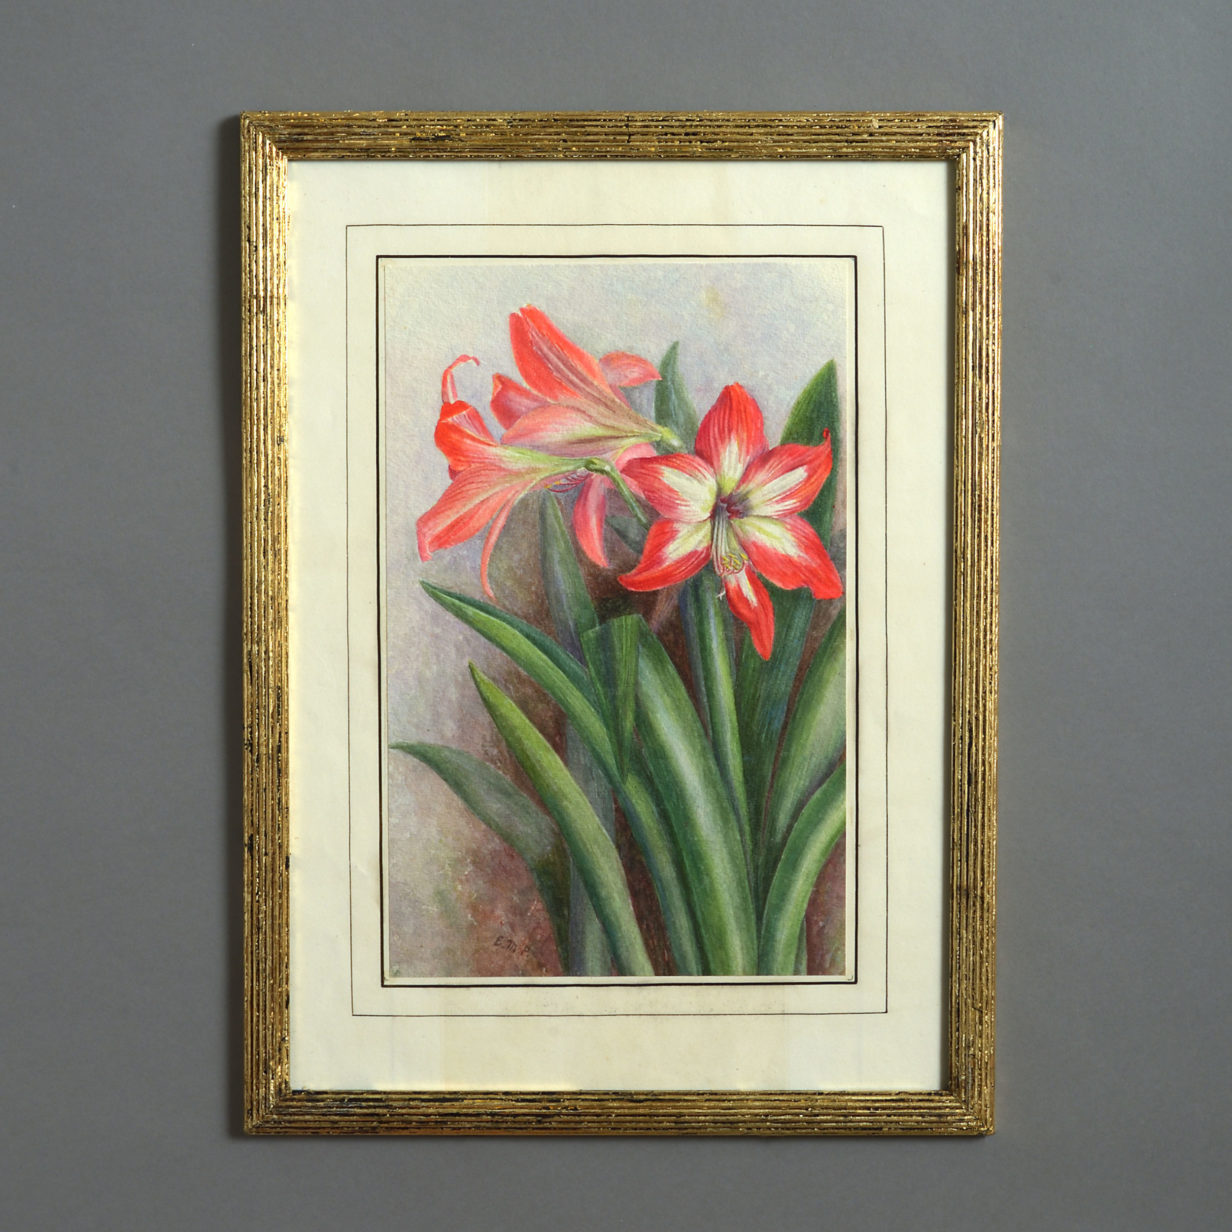 A Late 19th Century Botanical Watercolour Depicting Red Lilies